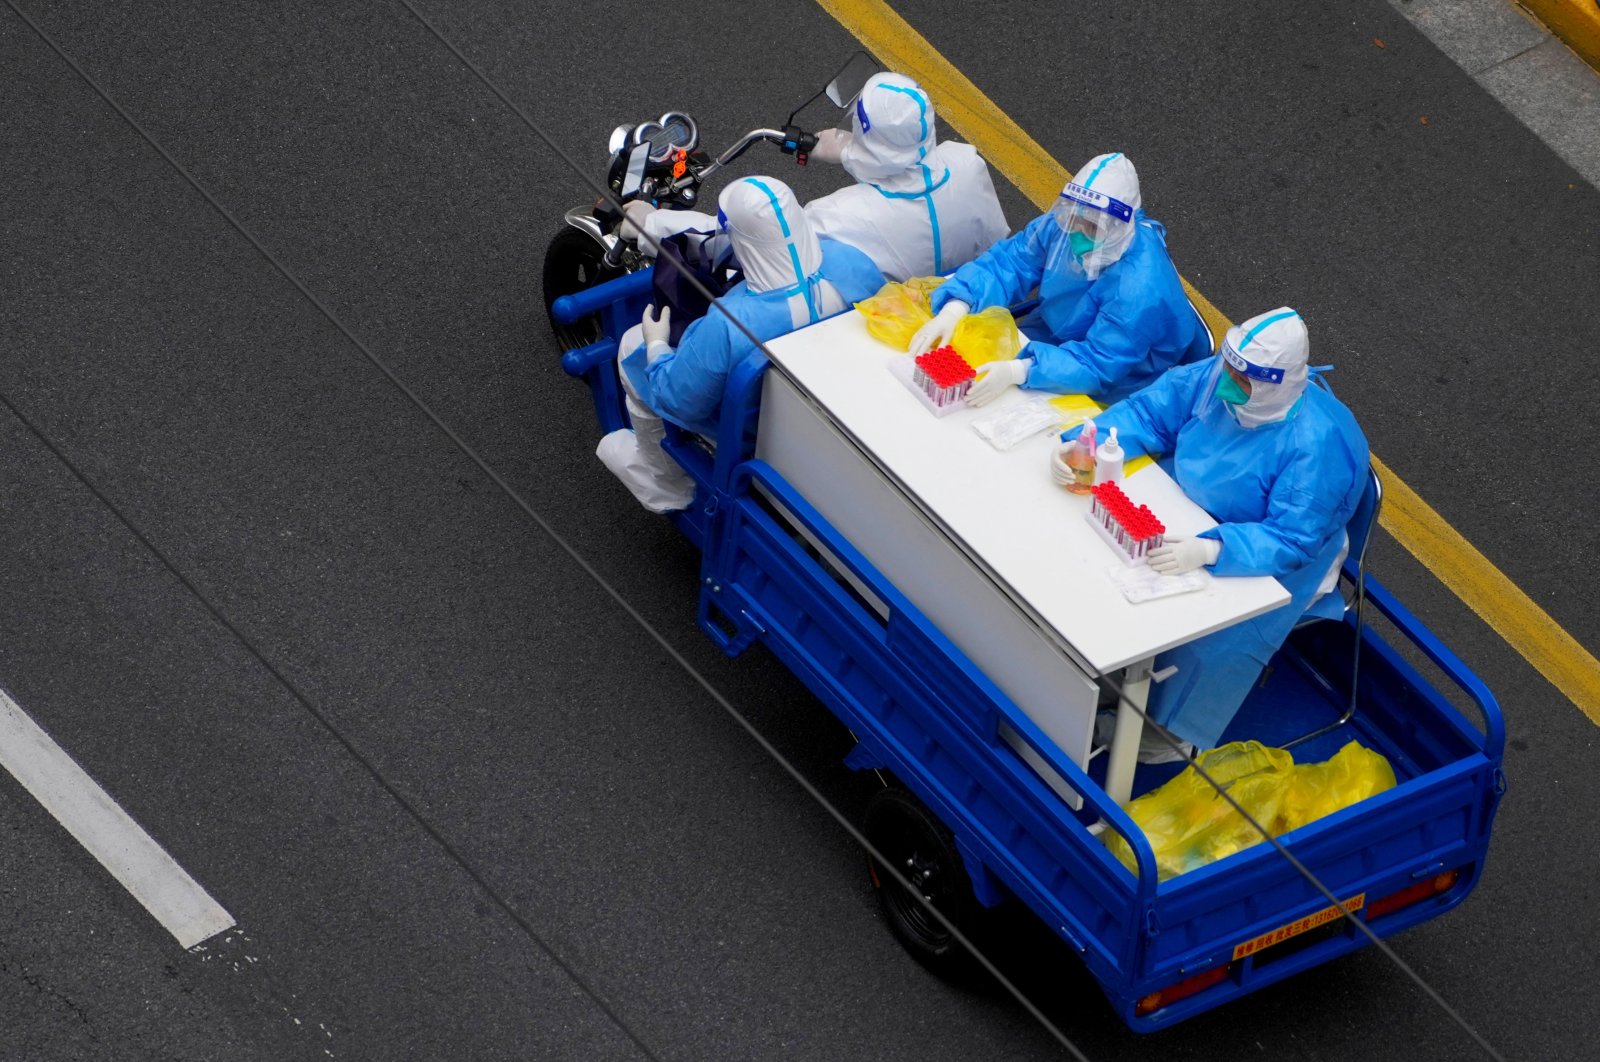 Workers in protective suits ride an electric tricycle on a street during lockdown amid COVID-19 pandemic, Shanghai, China, April 29, 2022. (Reuters Photo)